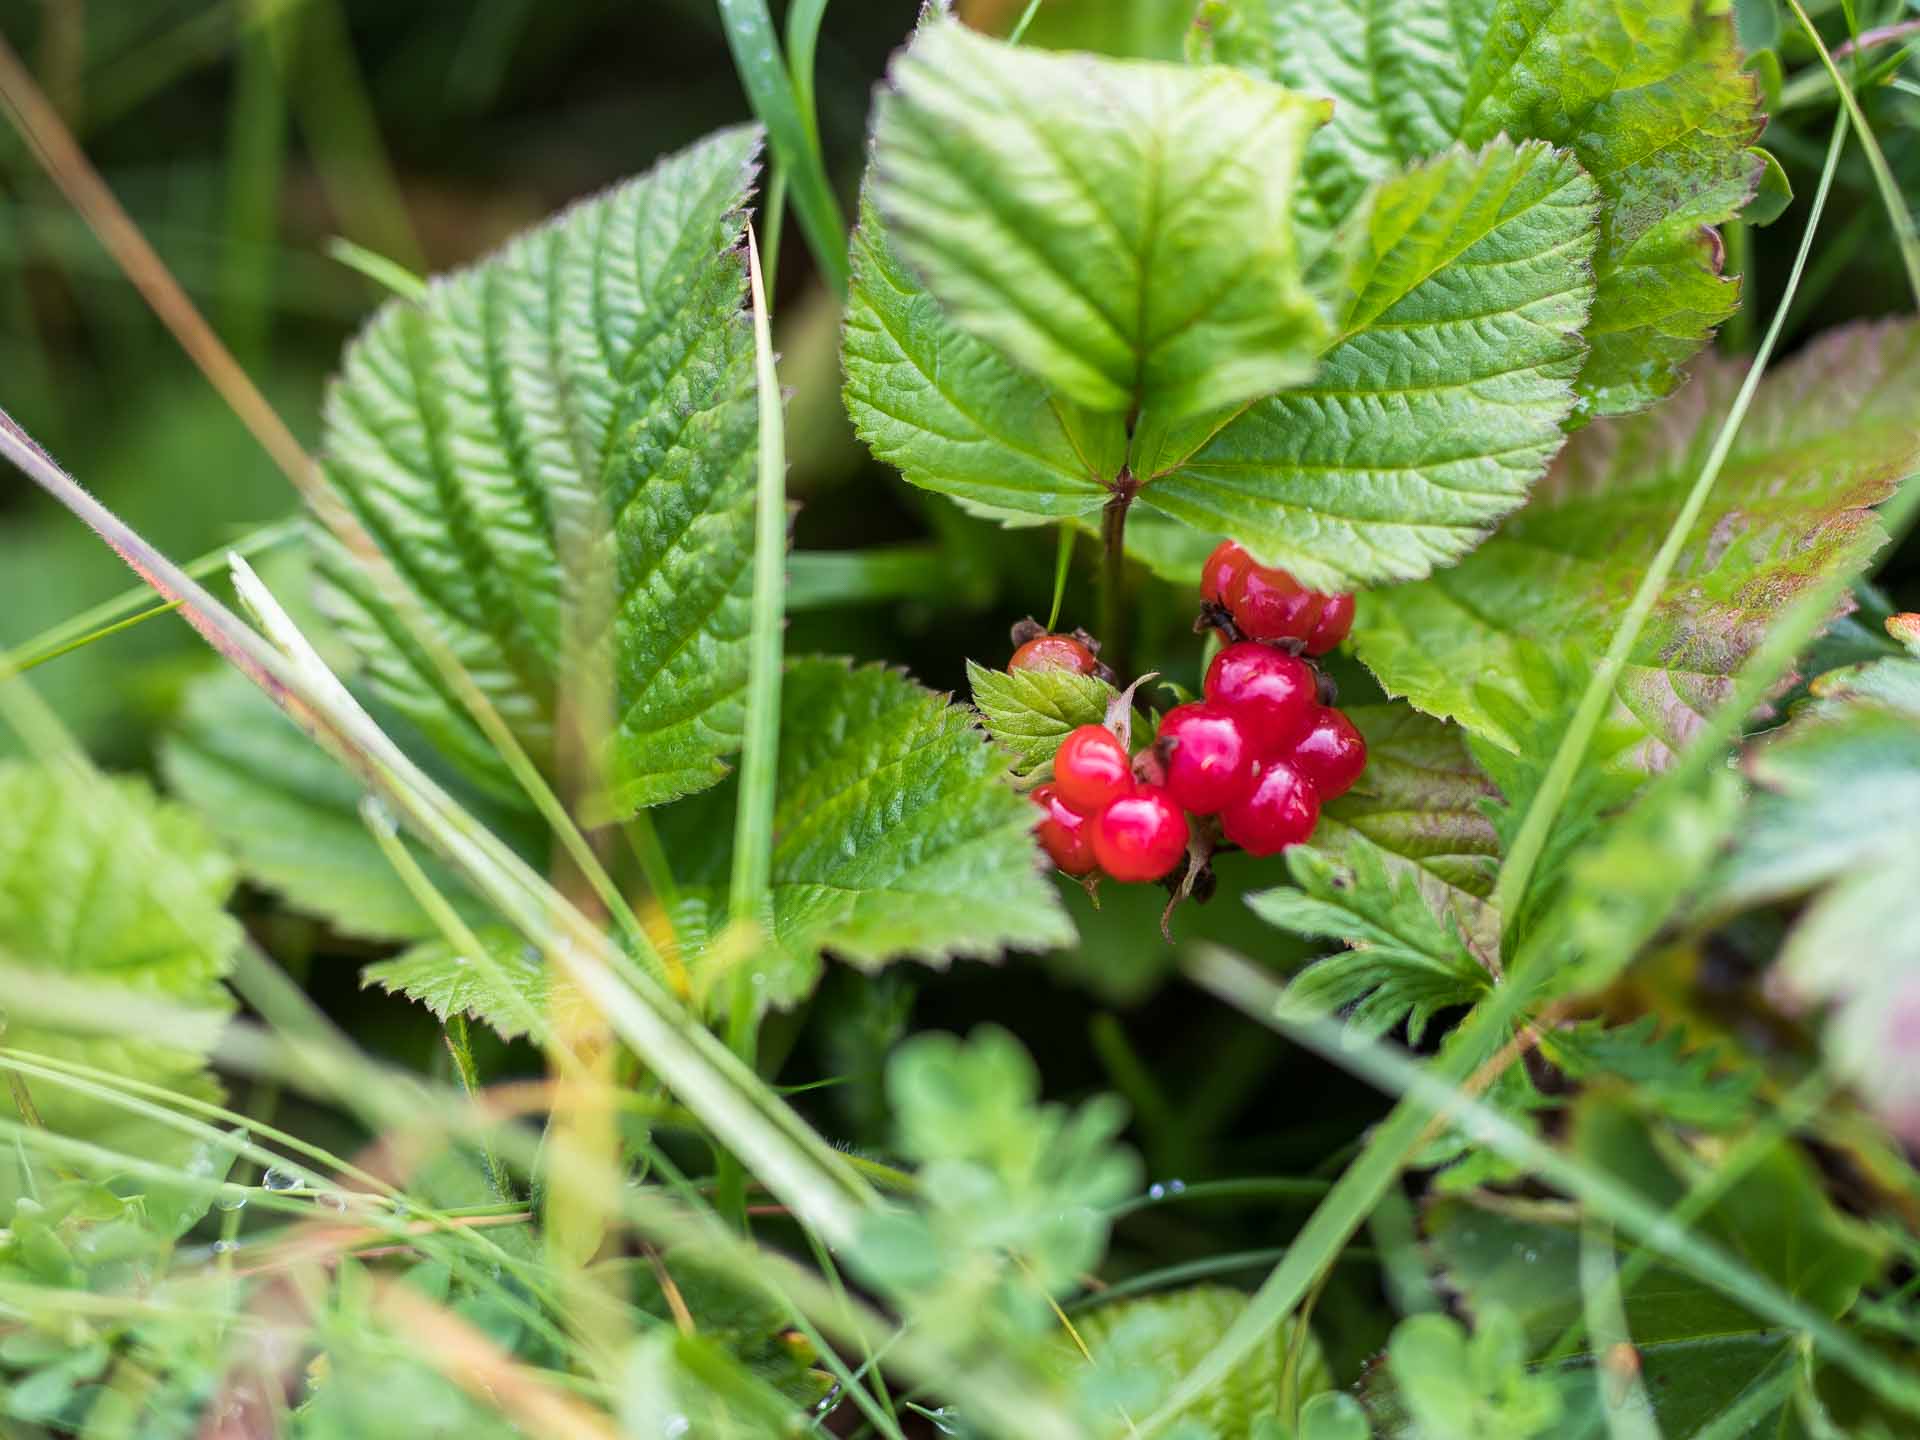 Thorny bushes with juicy berries, the brambleberry bushes grow in